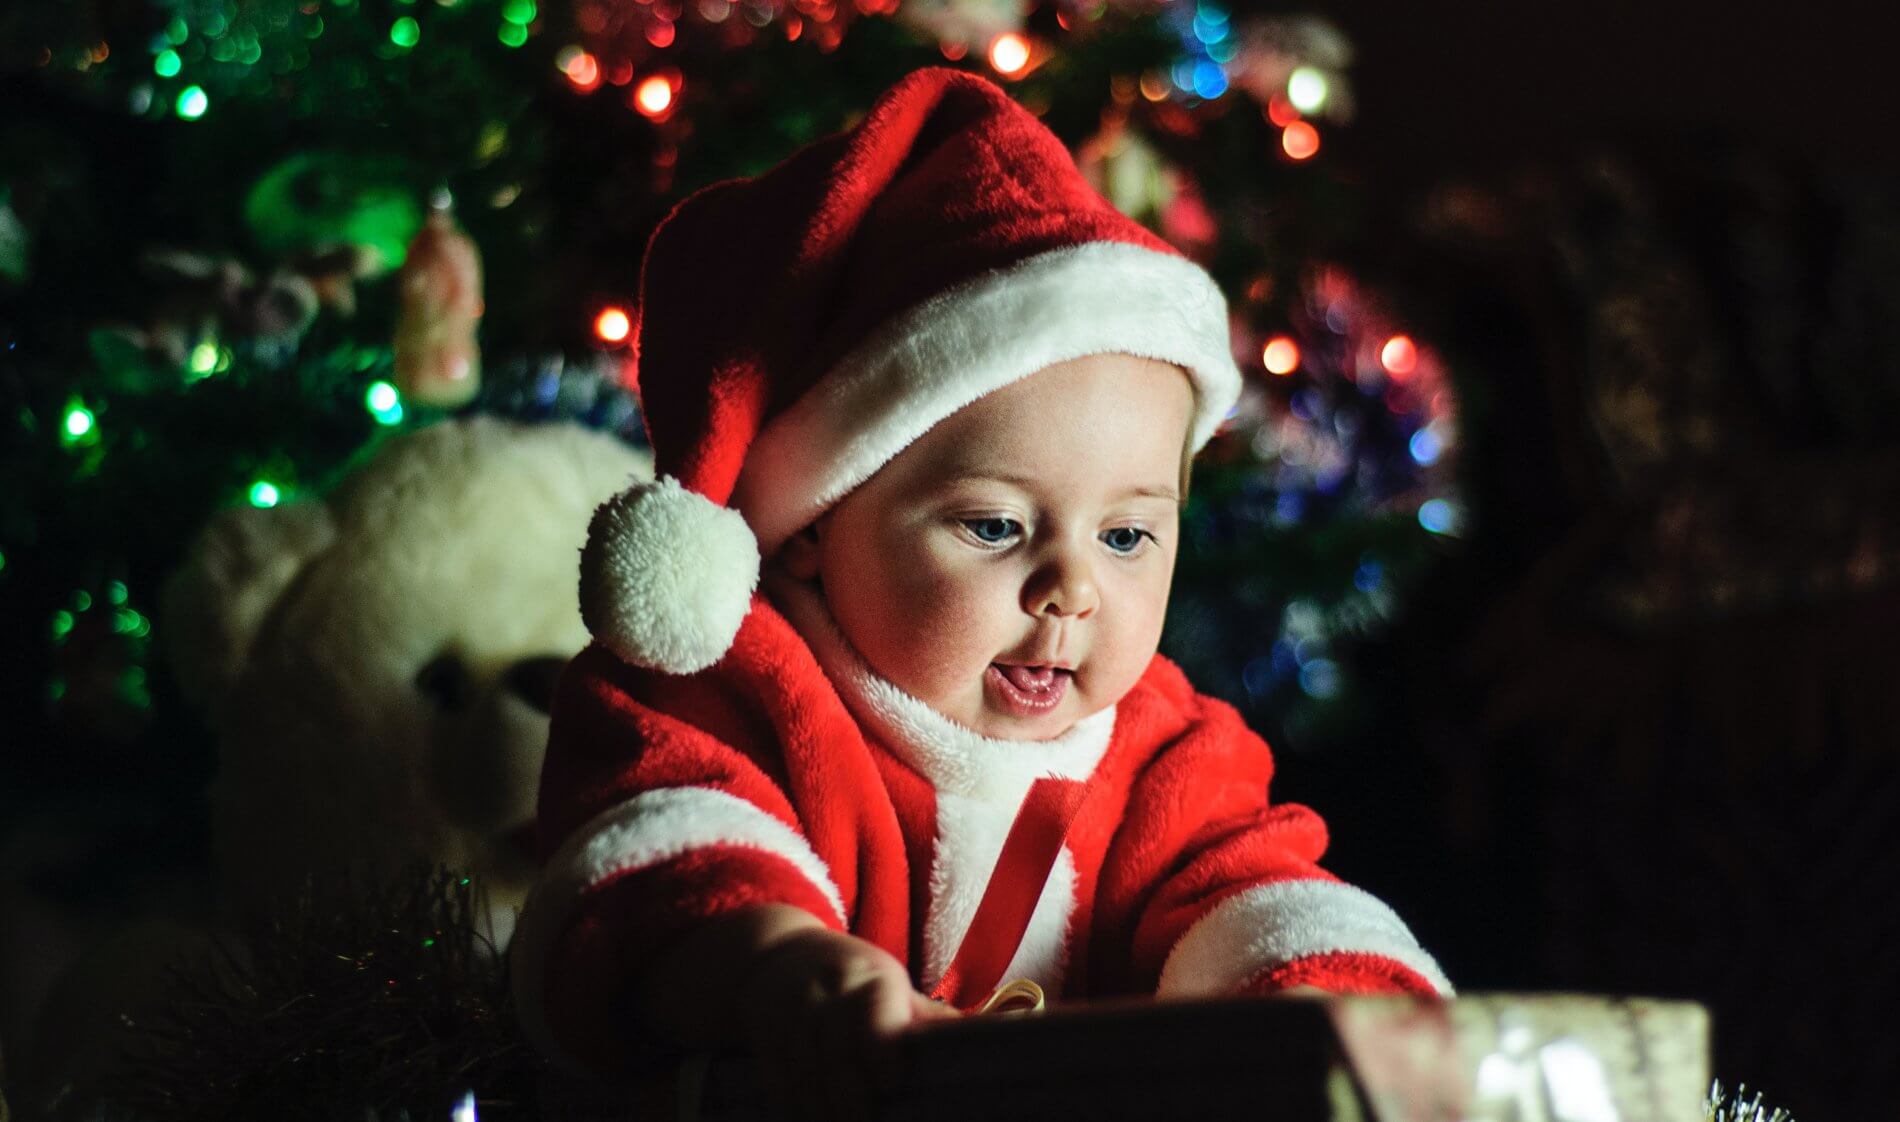 Baby opening present in a little Santa suit